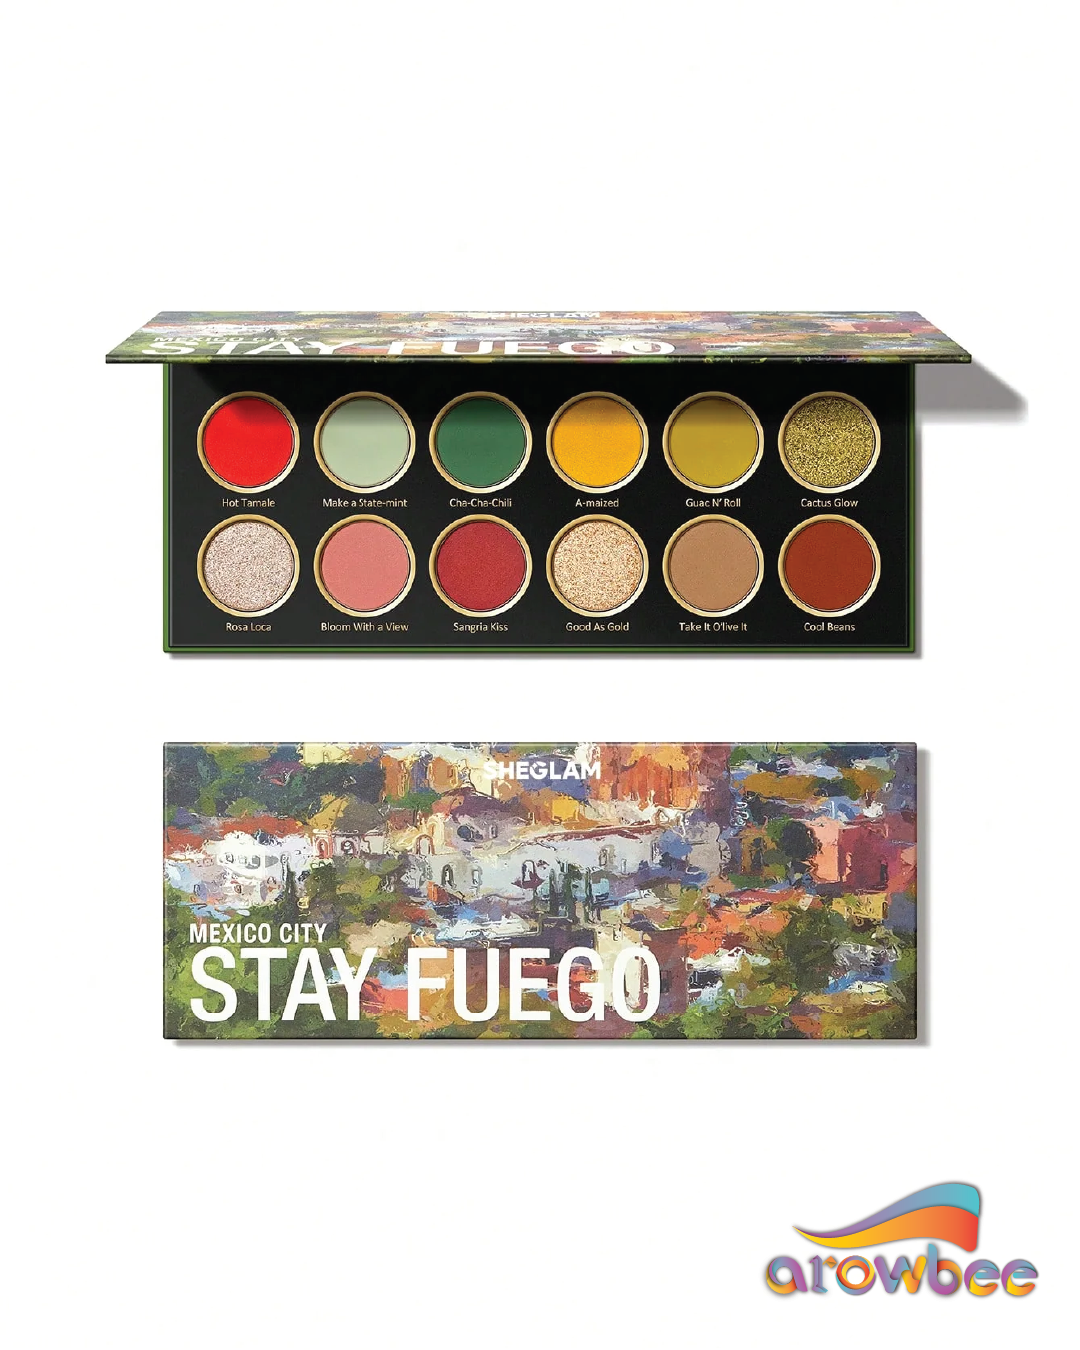 SHEGLAM Stay Fuego, Mexico Palette